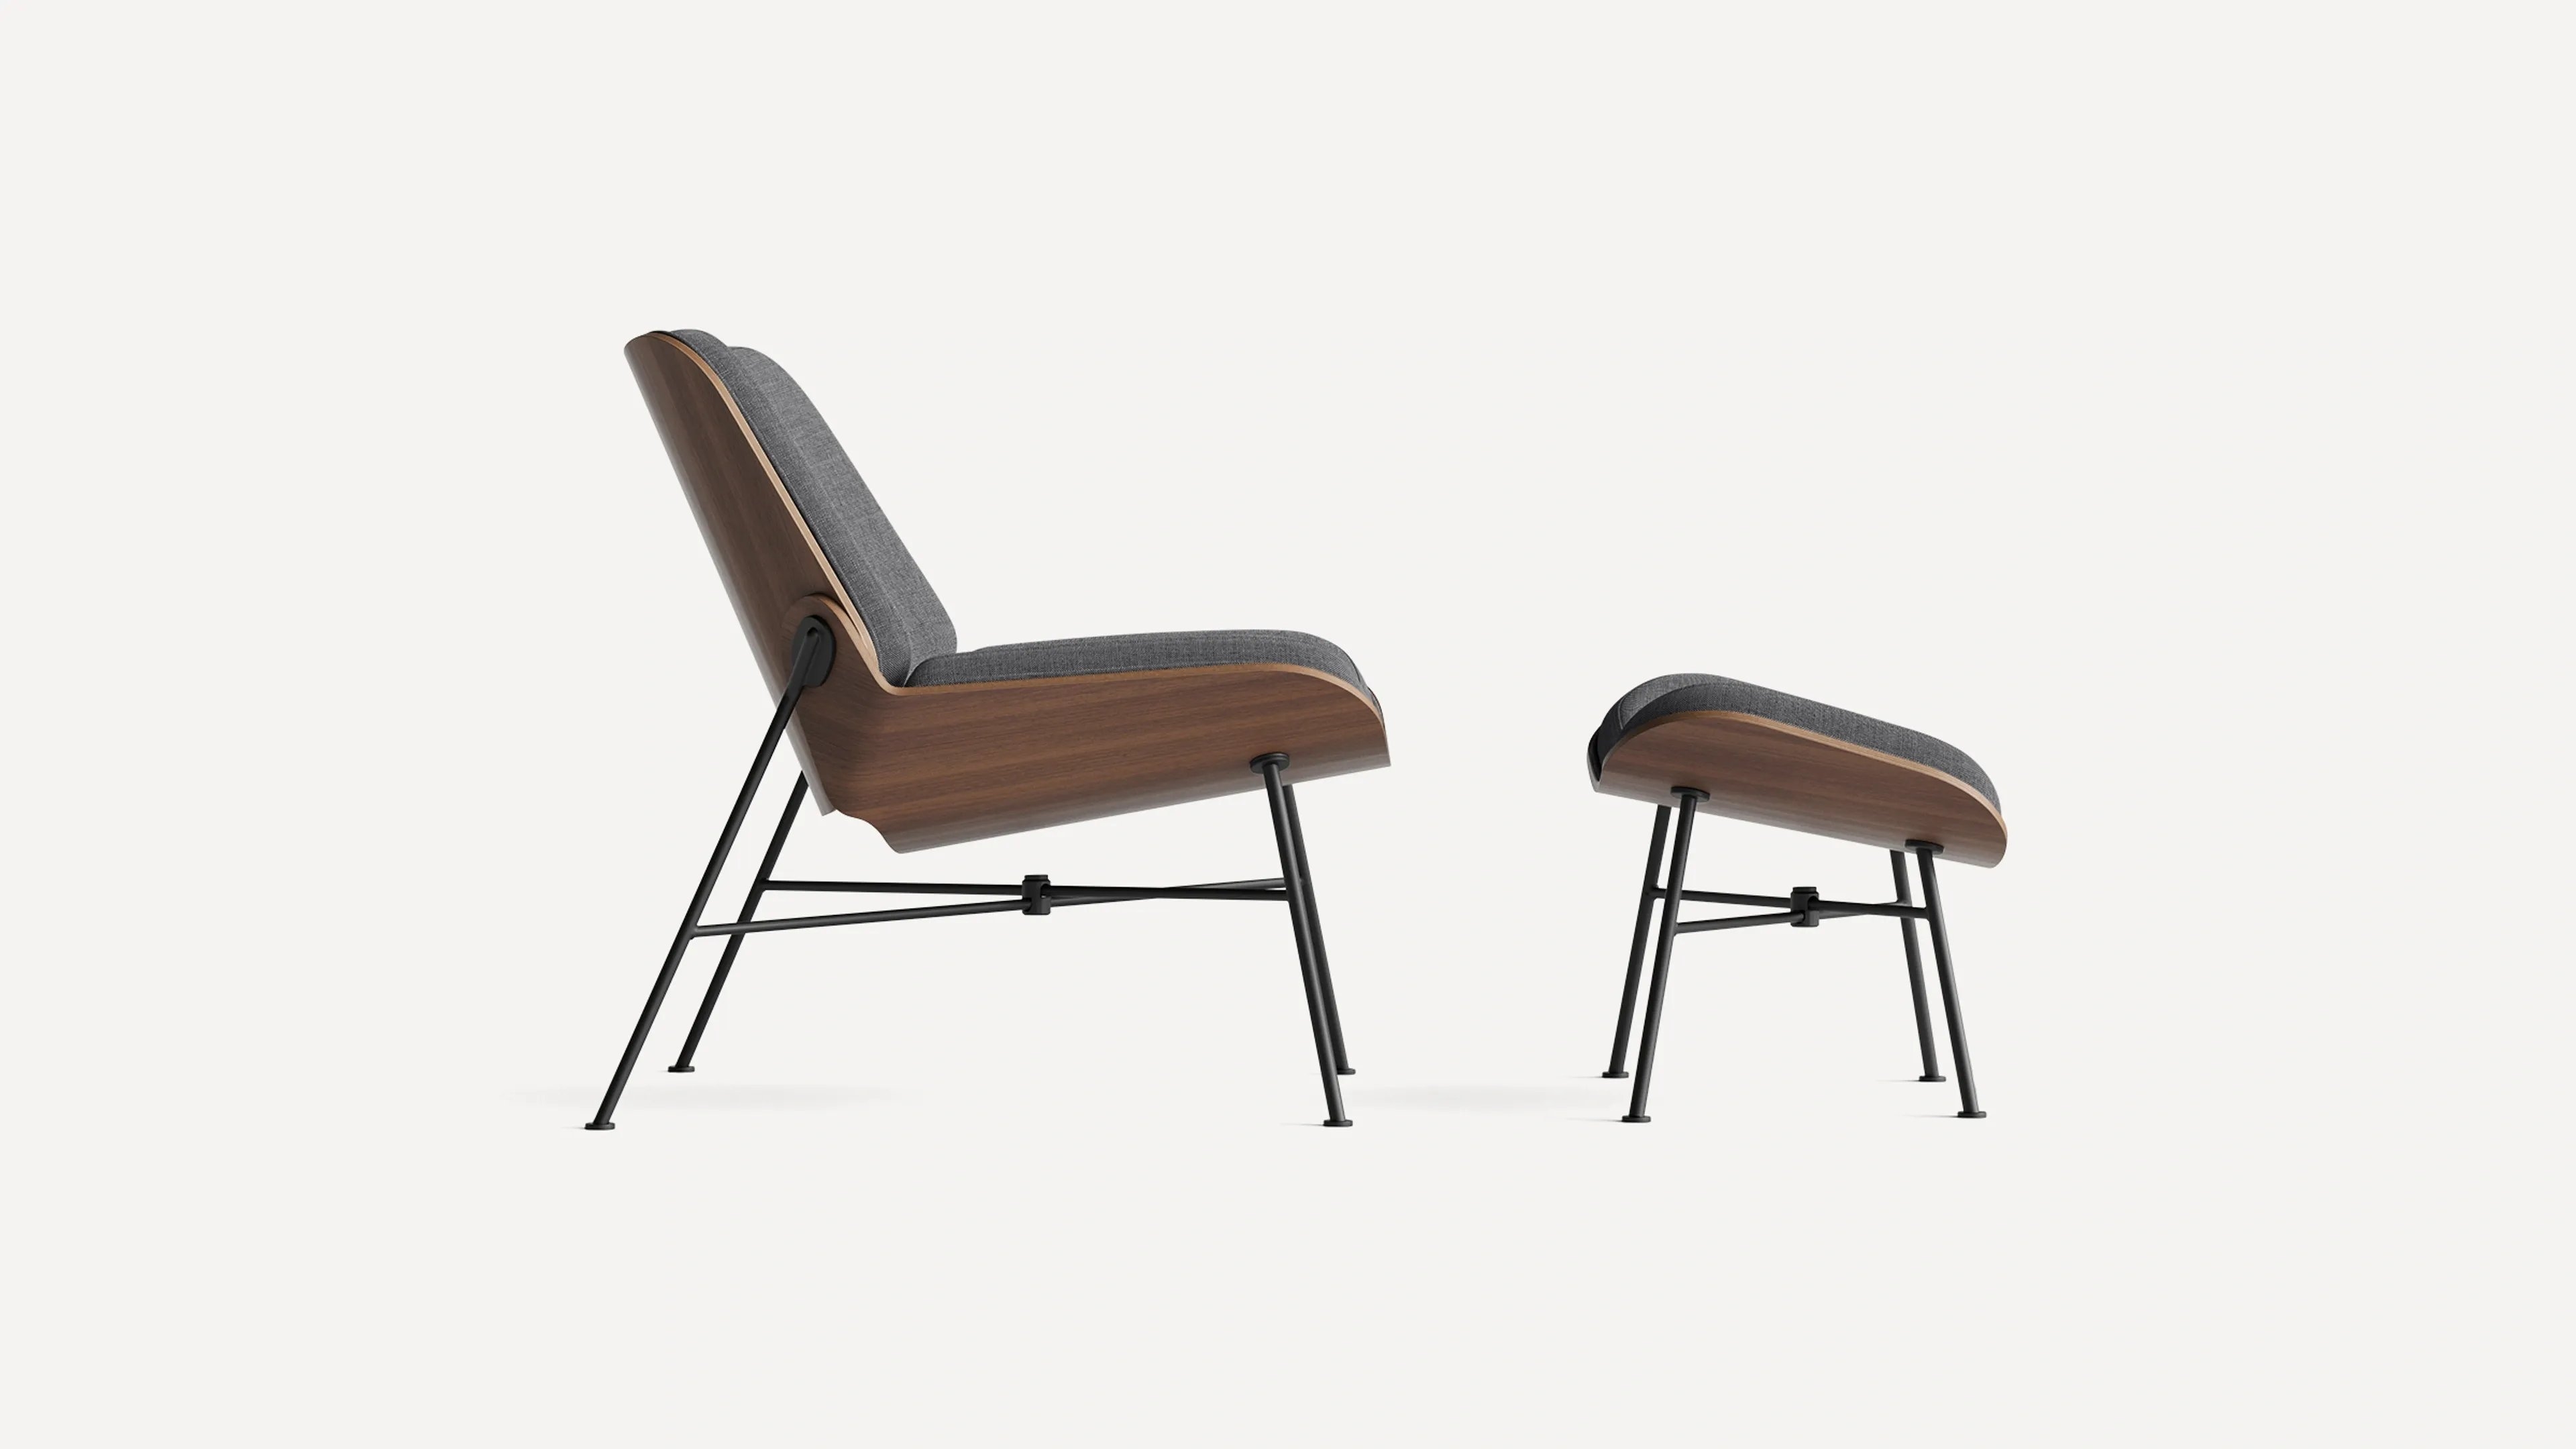 Vesper Fabric & Wood Lounge Chair in Heather Charcoal/Walnut - Image 2